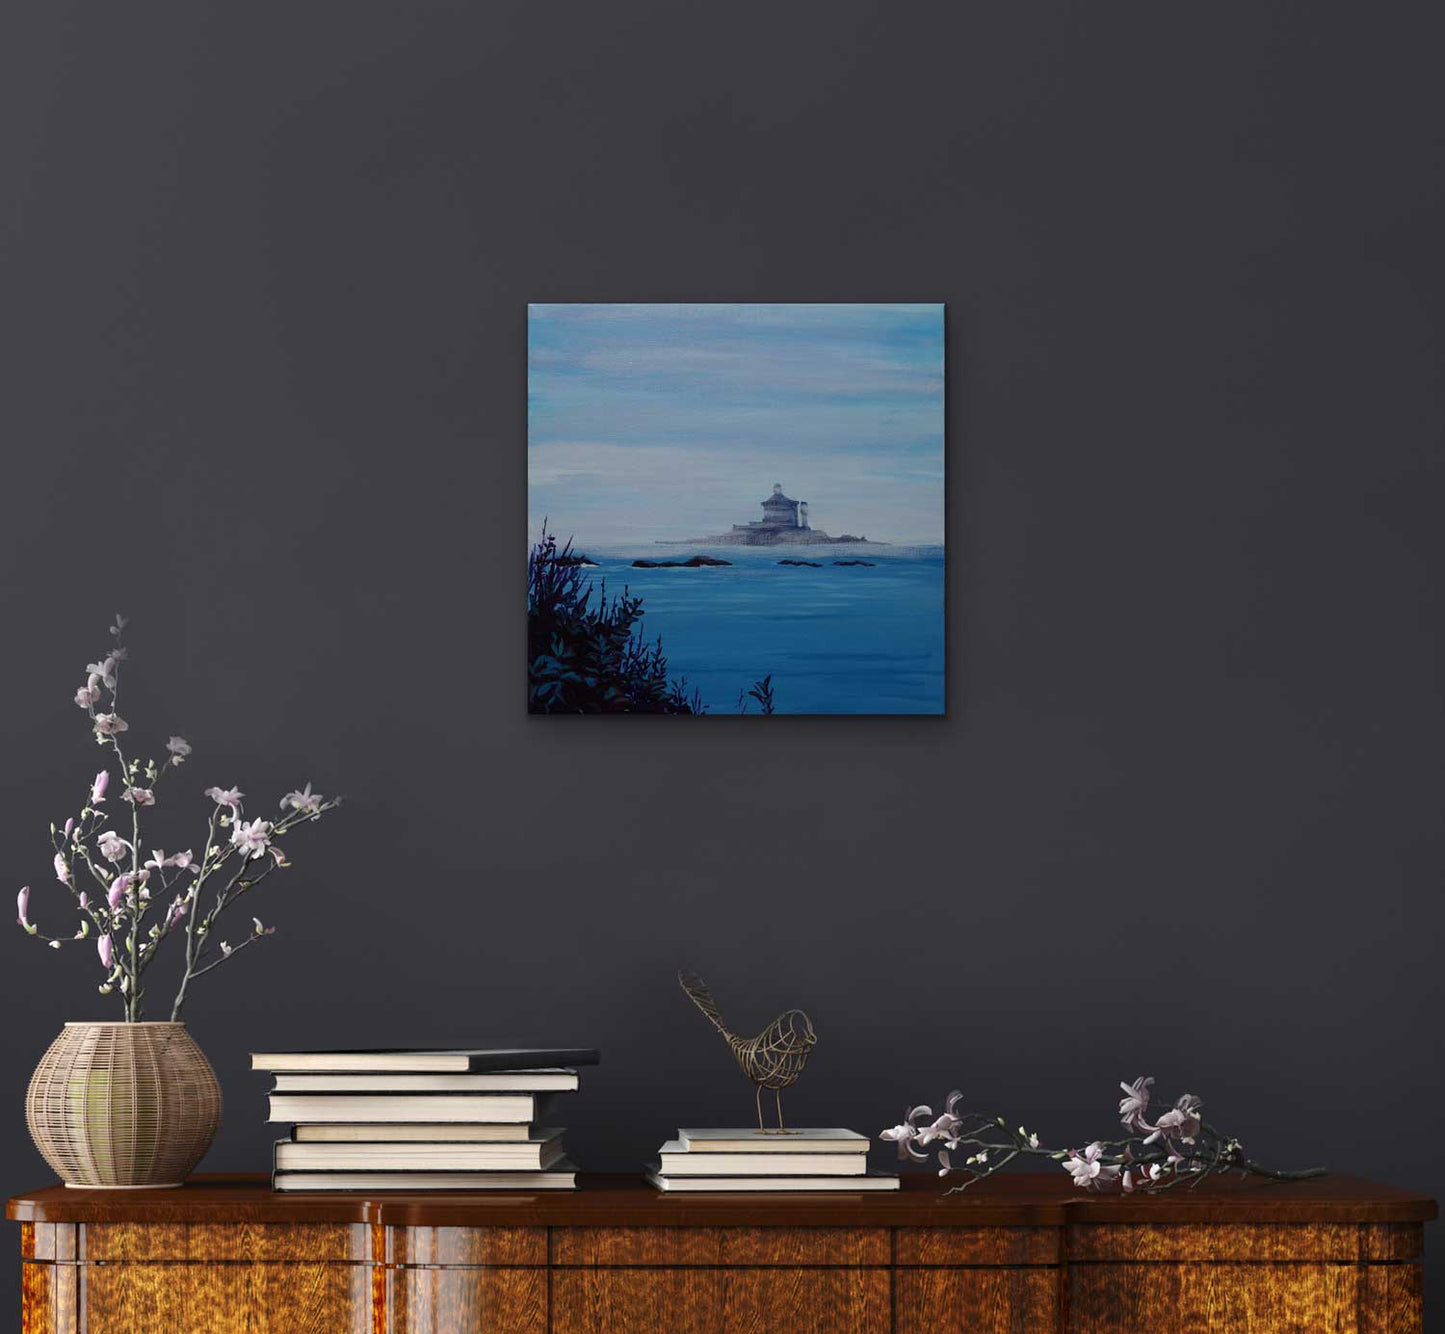 Lighthouse in the fog of the Atlantic sea in Lockeport Nova scotia south shore original painting by a professional Canadian landscape artist. visual art ready to hang on your wall.